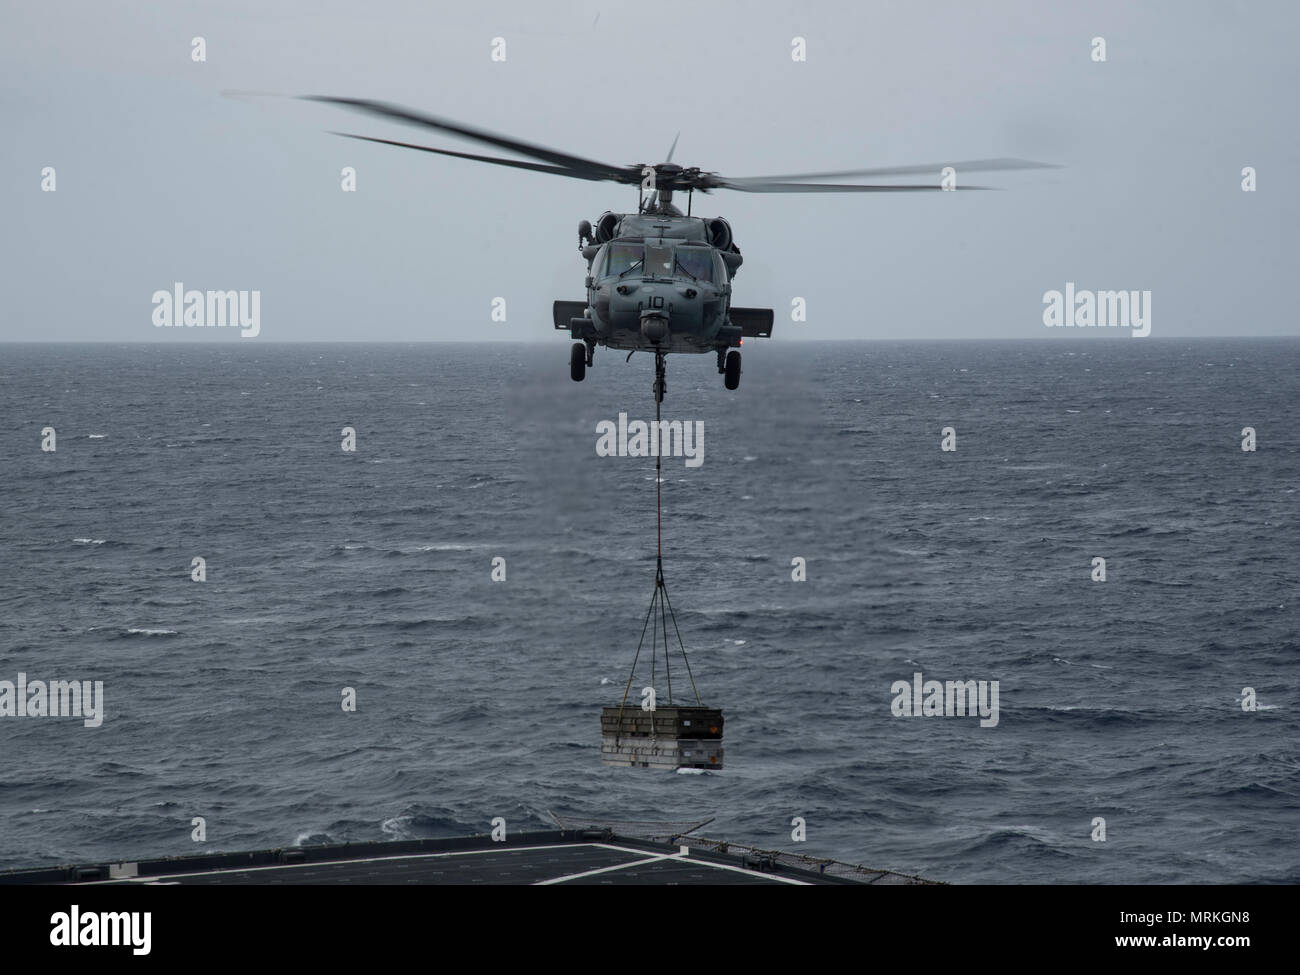 170620-N-QI061-088   ATLANTIC OCEAN (June 20, 2017) MH-60S Sea Hawk assigned to the Dusty Dogs of Helicopter Sea Combat Squadron (HSC) 7 delivers ammunition crates to the Military Sealift Command dry cargo and ammunition ship USNS Medgar Evers (T-AKE 13) during an ammunition off load with the aircraft carrier USS Dwight D. Eisenhower (CVN 69) (Ike). Ike is underway during the sustainment phase of the Optimized Fleet Response Plan (OFRP). (U.S. Navy photo by Mass Communication Specialist 3rd Class Nathan T. Beard) Stock Photo